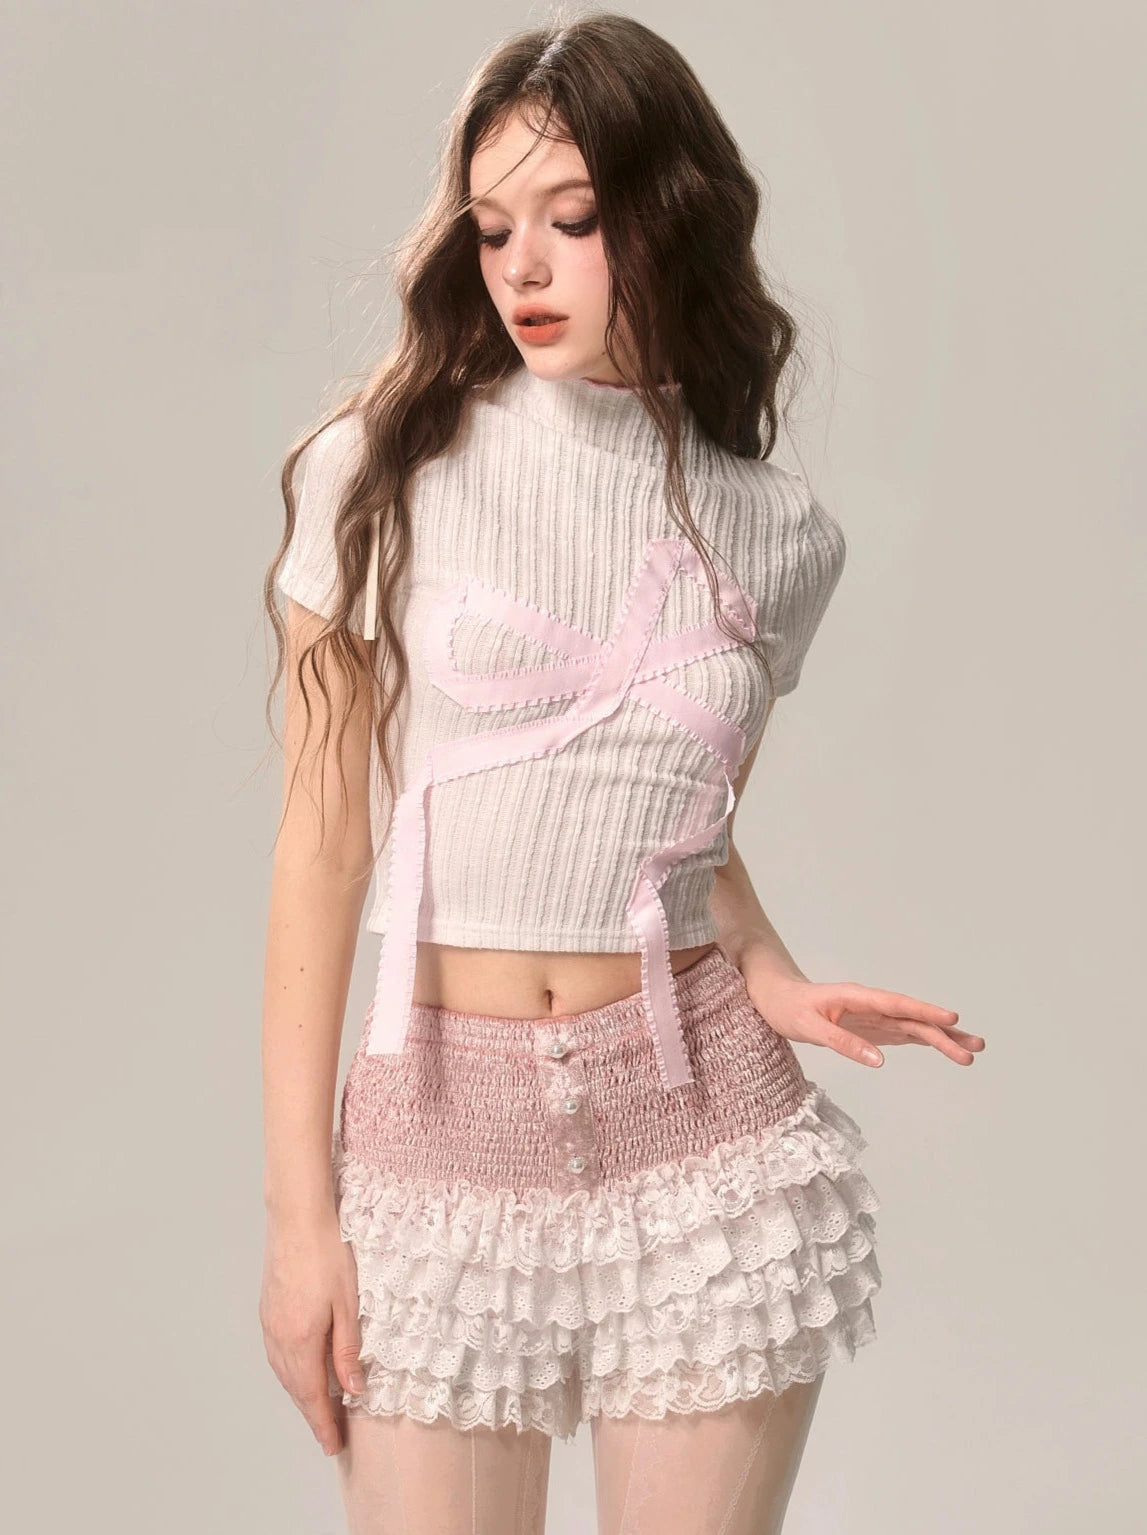 Pink White Part Lace A-Line Cake Skirt [Shorts Style